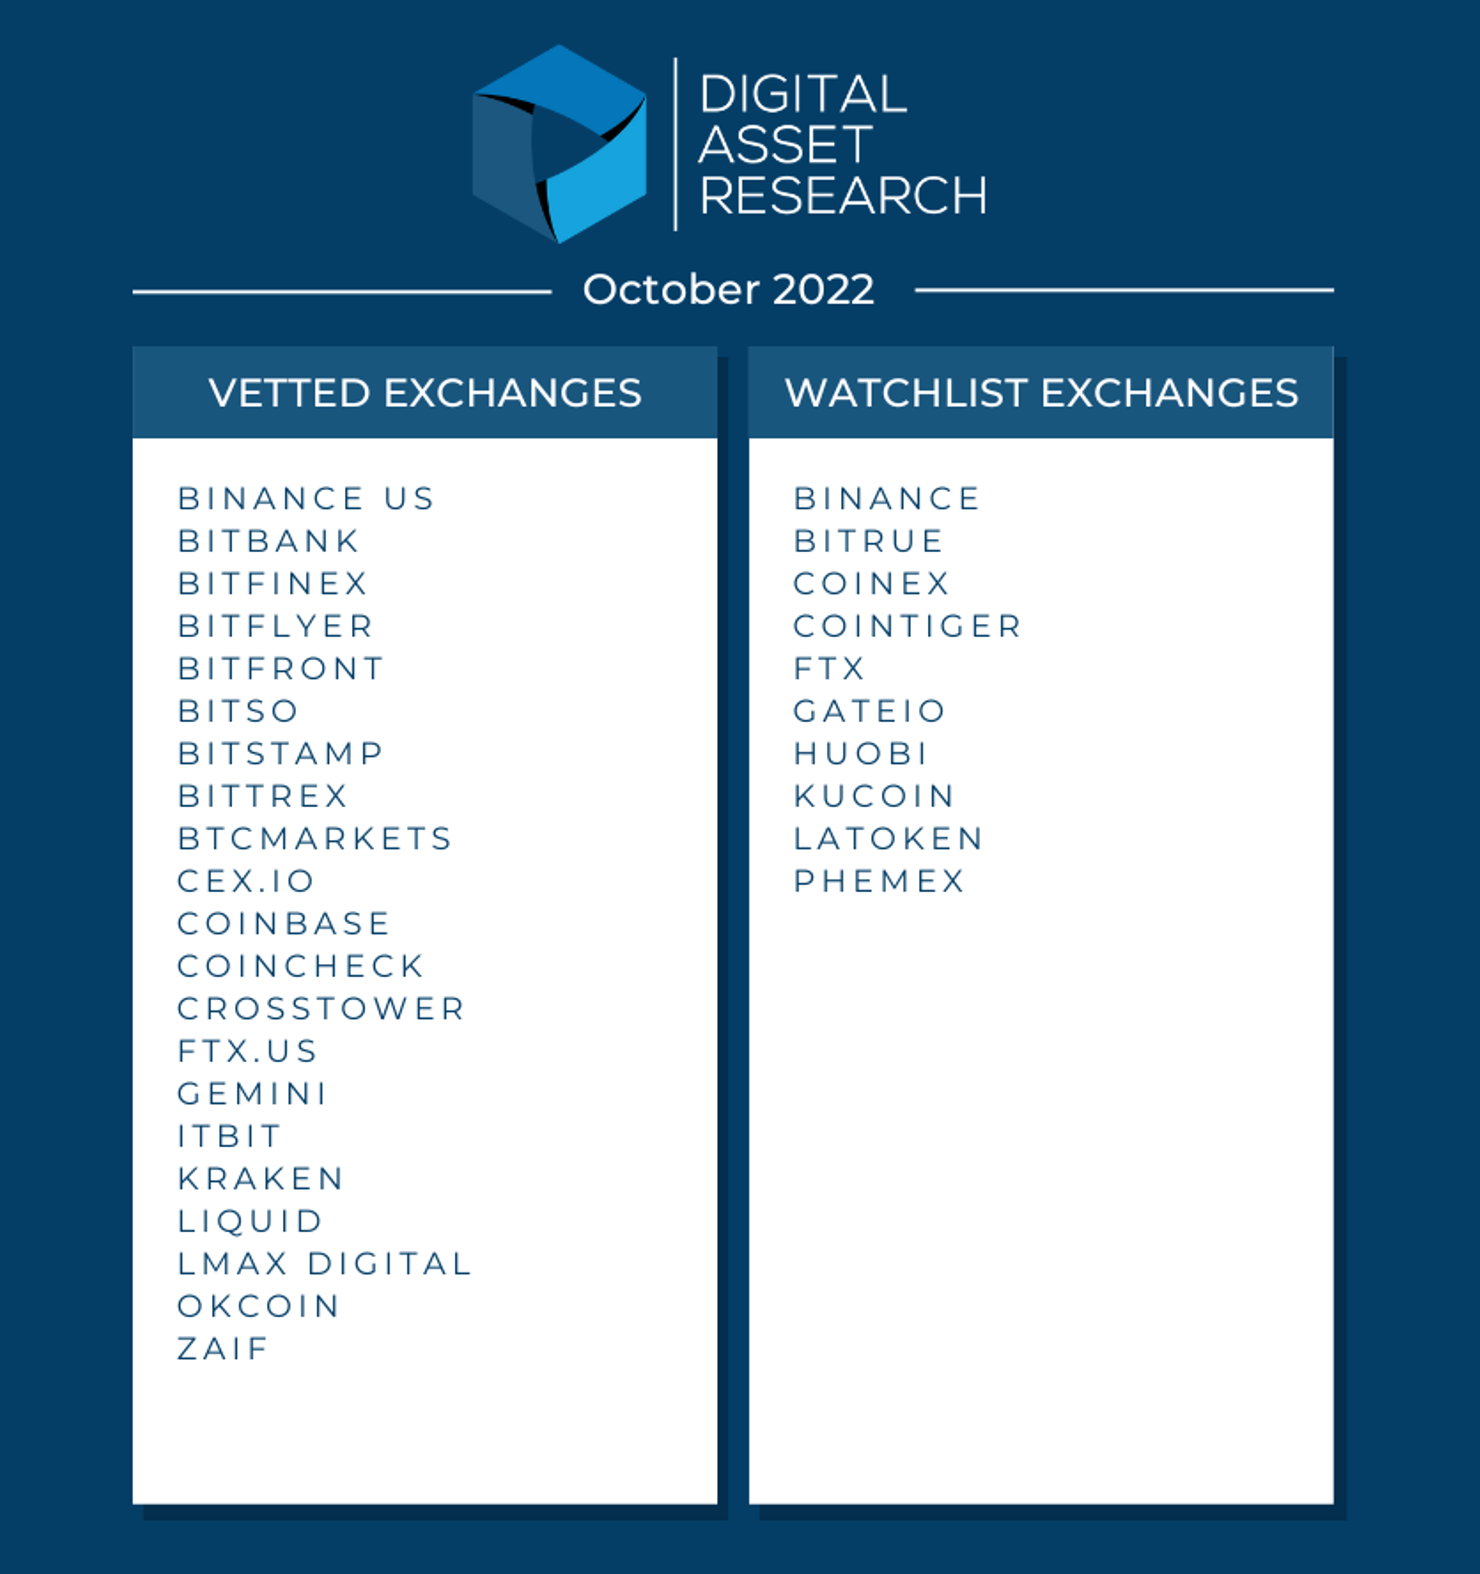 Digital Asset Research Announces October 2022 Crypto Exchange Vetting Results